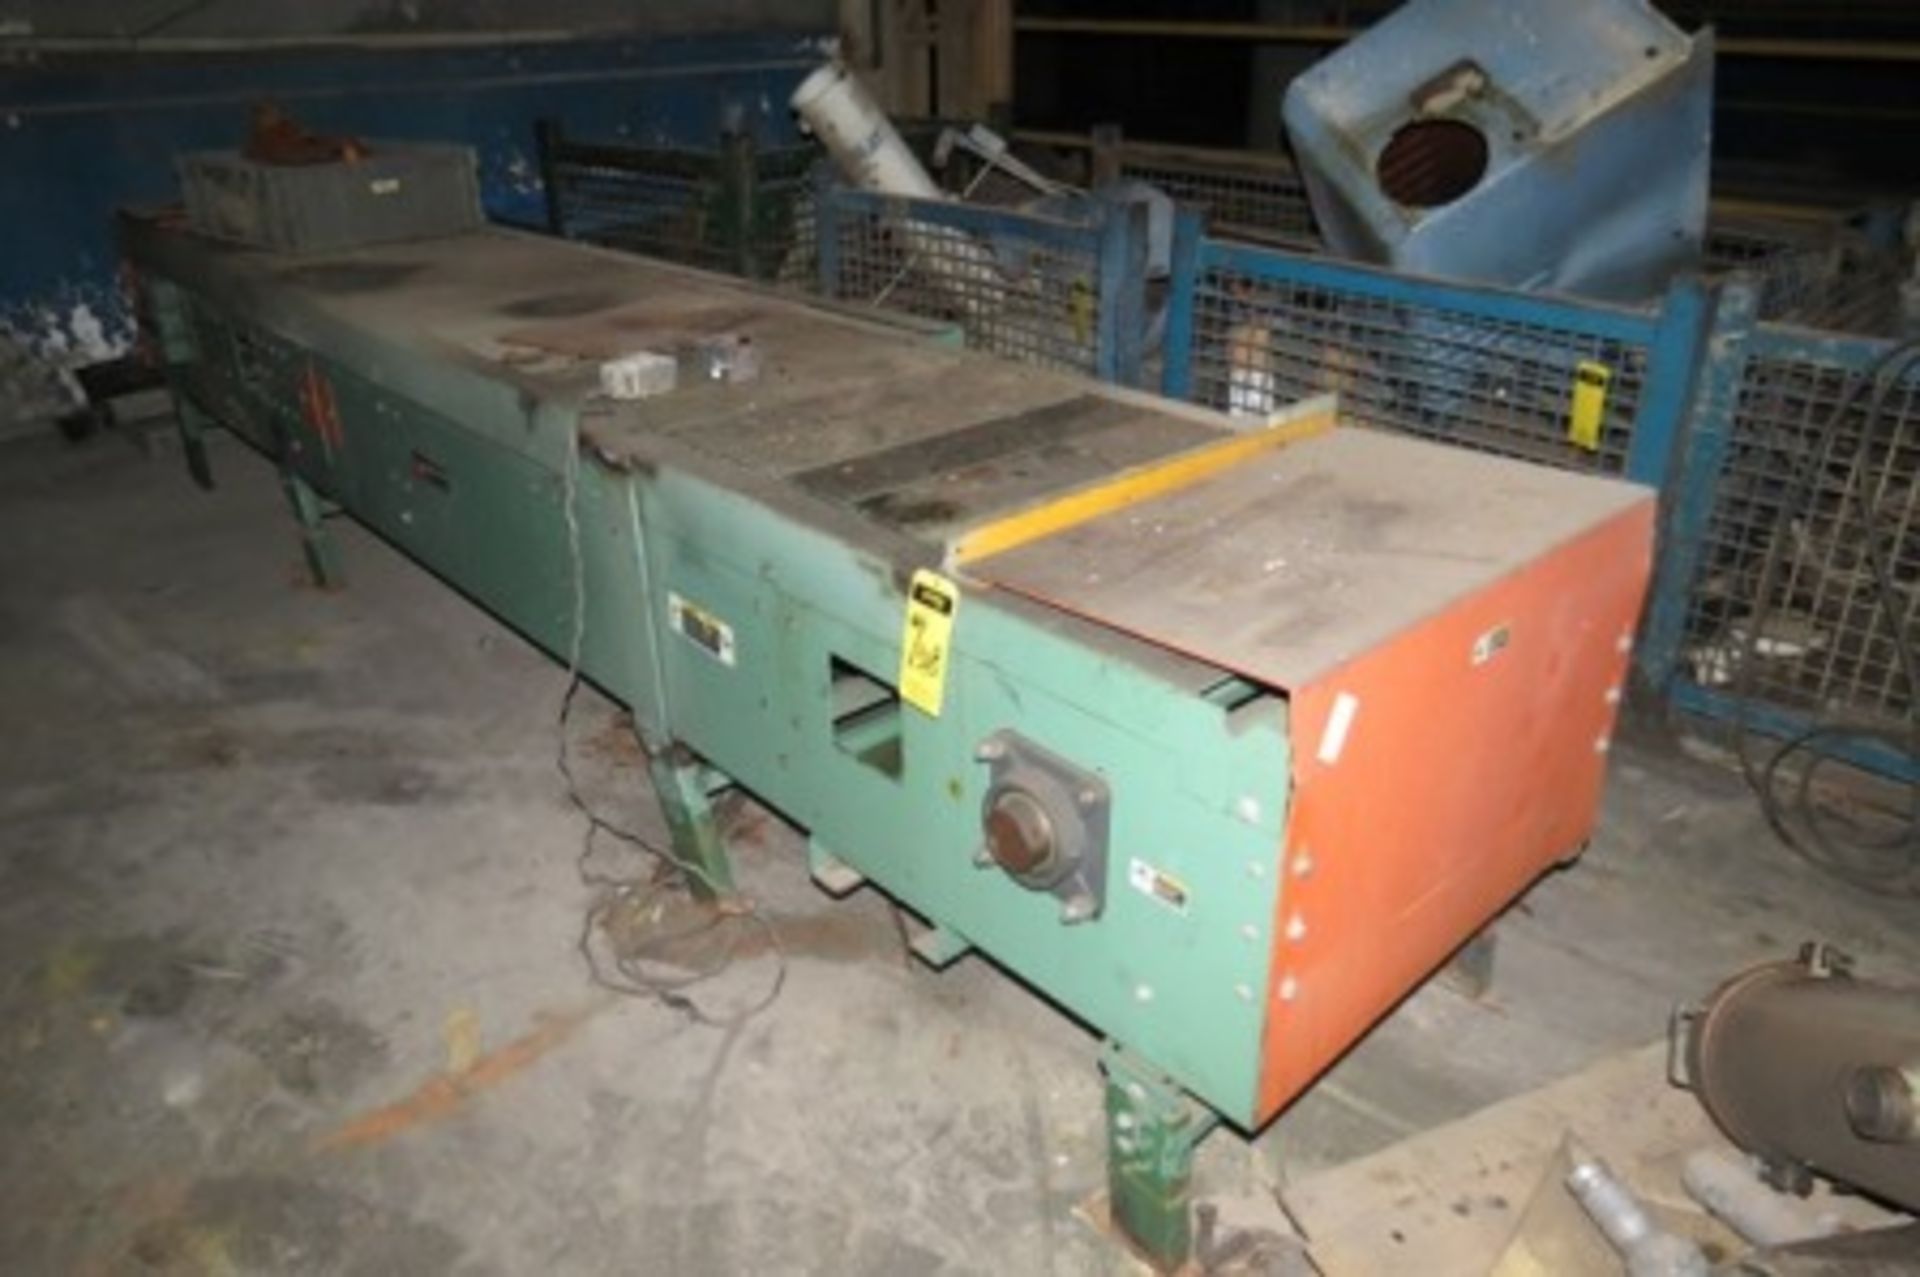 Electric motor 50 hp. Spare parts for die casting machines. Belt conveyor - Image 12 of 19